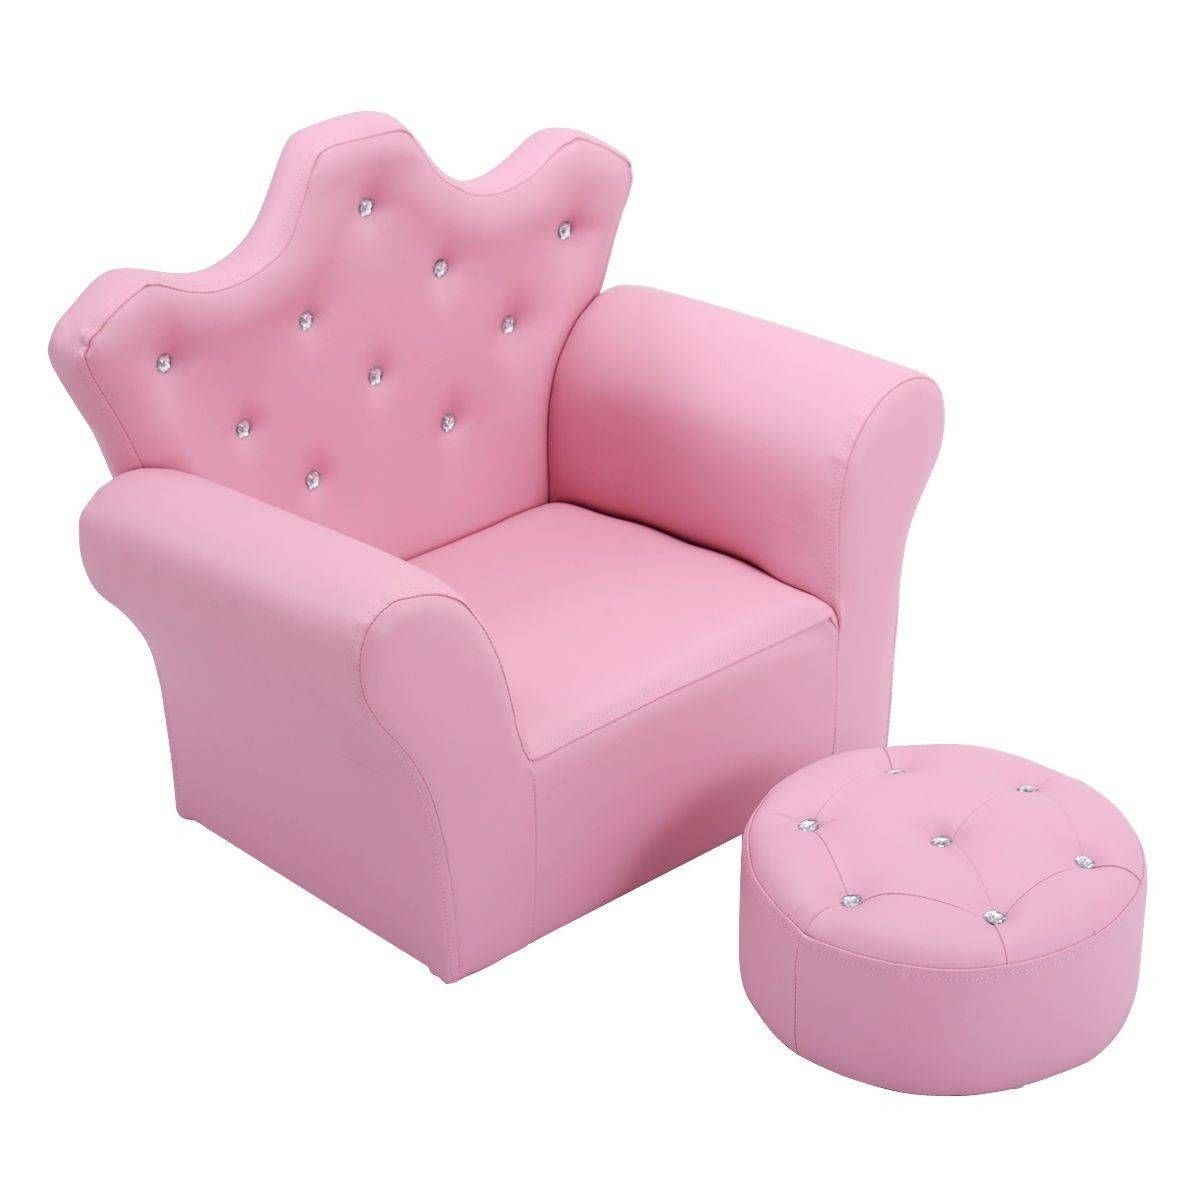 Princess Pink Chair With Ottoman Couch Kids Living Room Toddler Throughout Kids Sofa Chair And Ottoman Set Zebra (View 26 of 30)